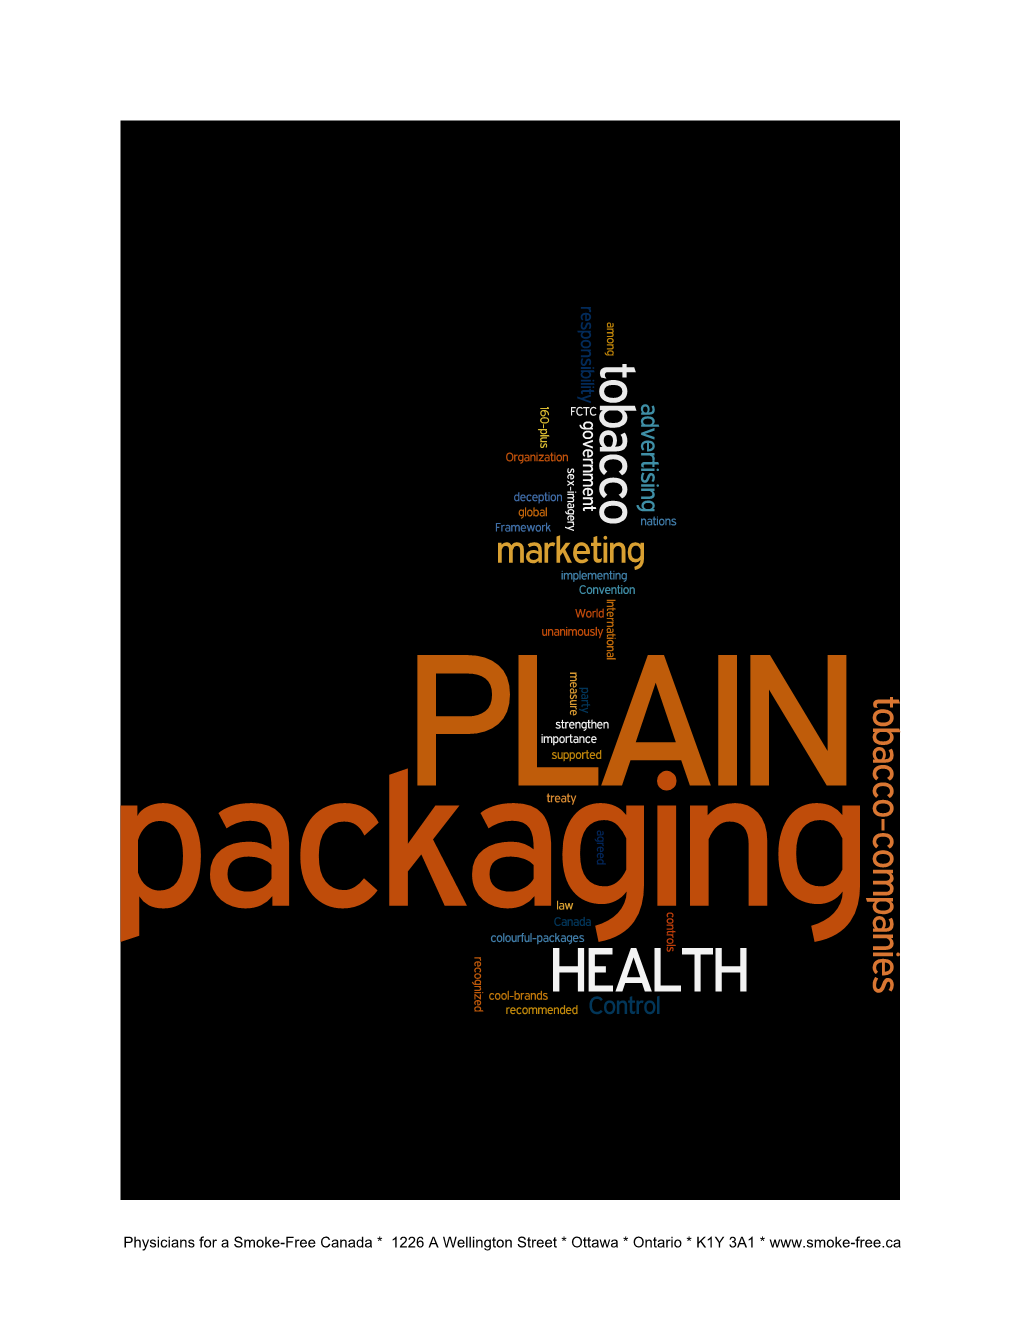 Inquiry Into Plain Tobacco Packaging (Removing Branding from Cigarette